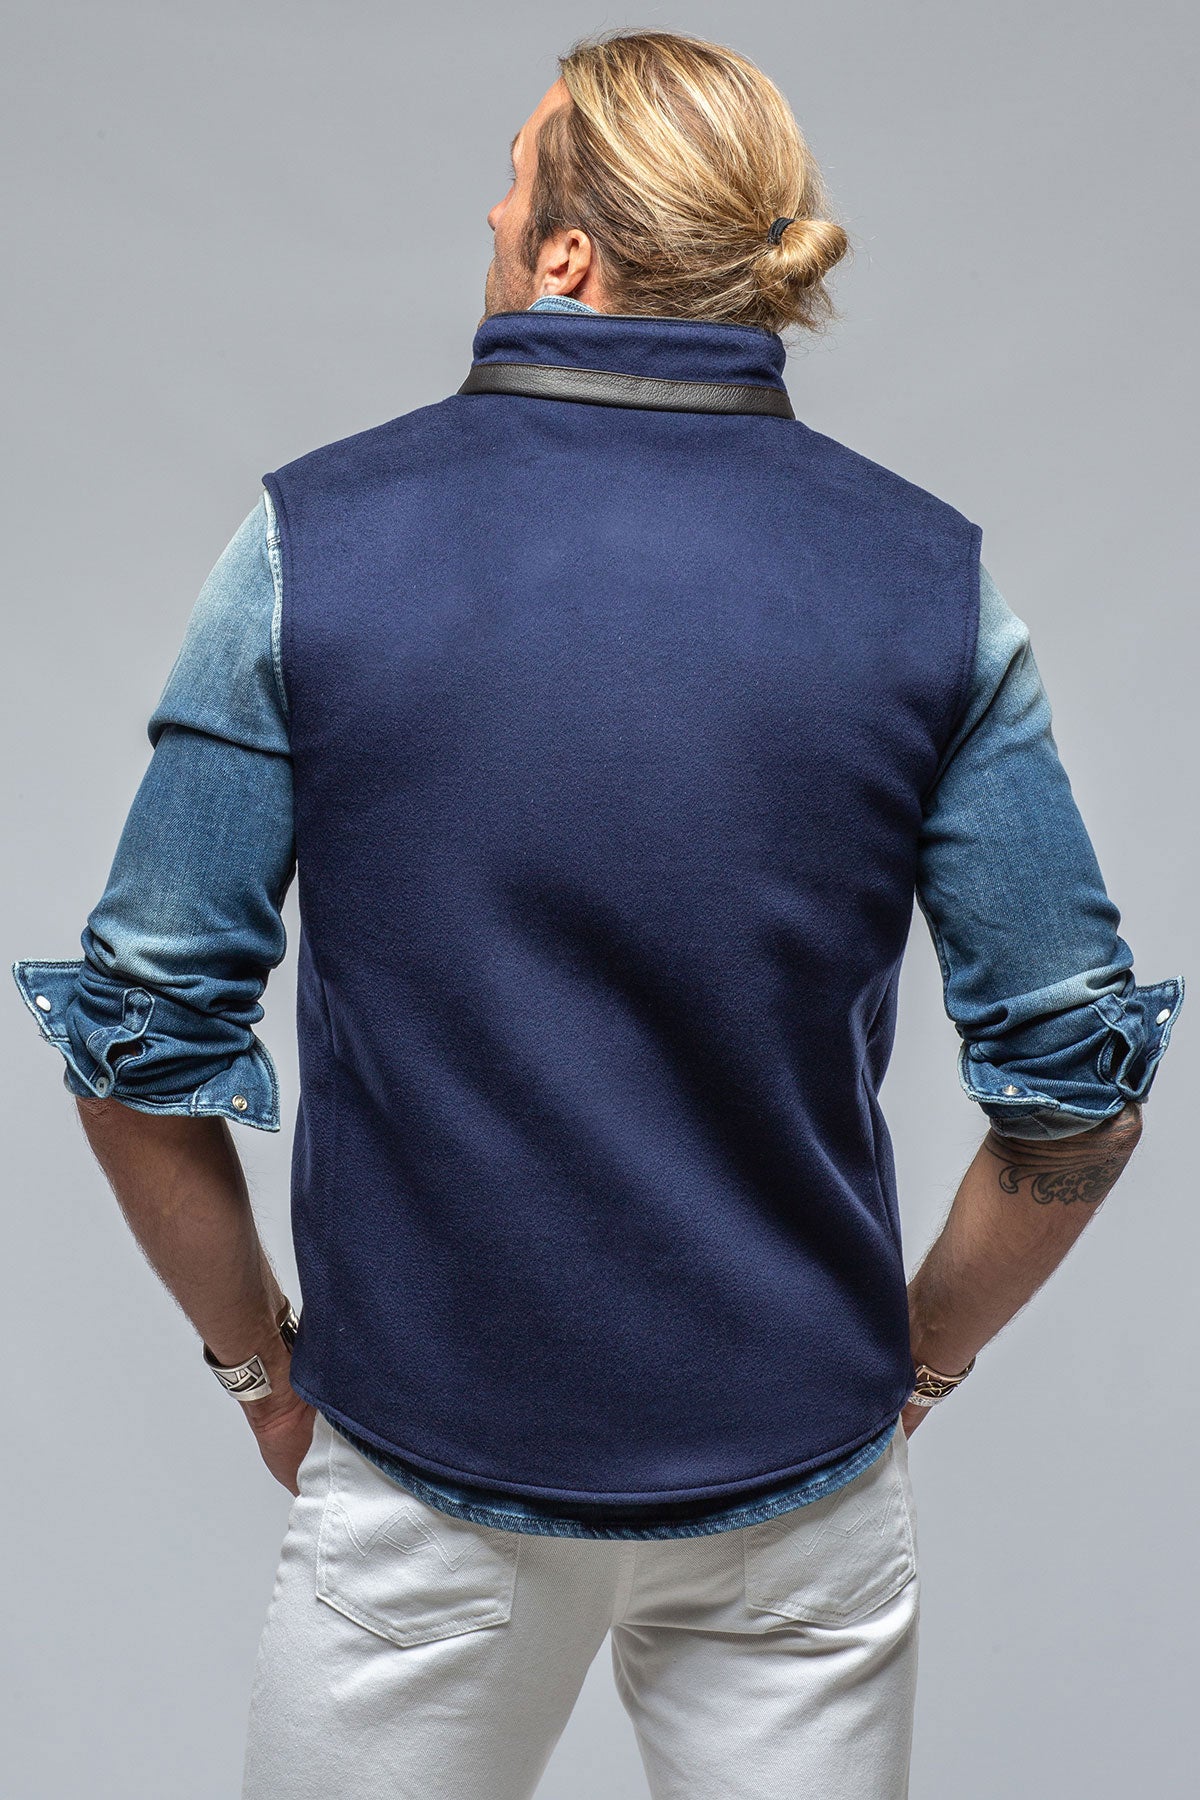 Paonia Colombo Virgin Wool Vest | Samples - Mens - Outerwear - Cloth | Colombo